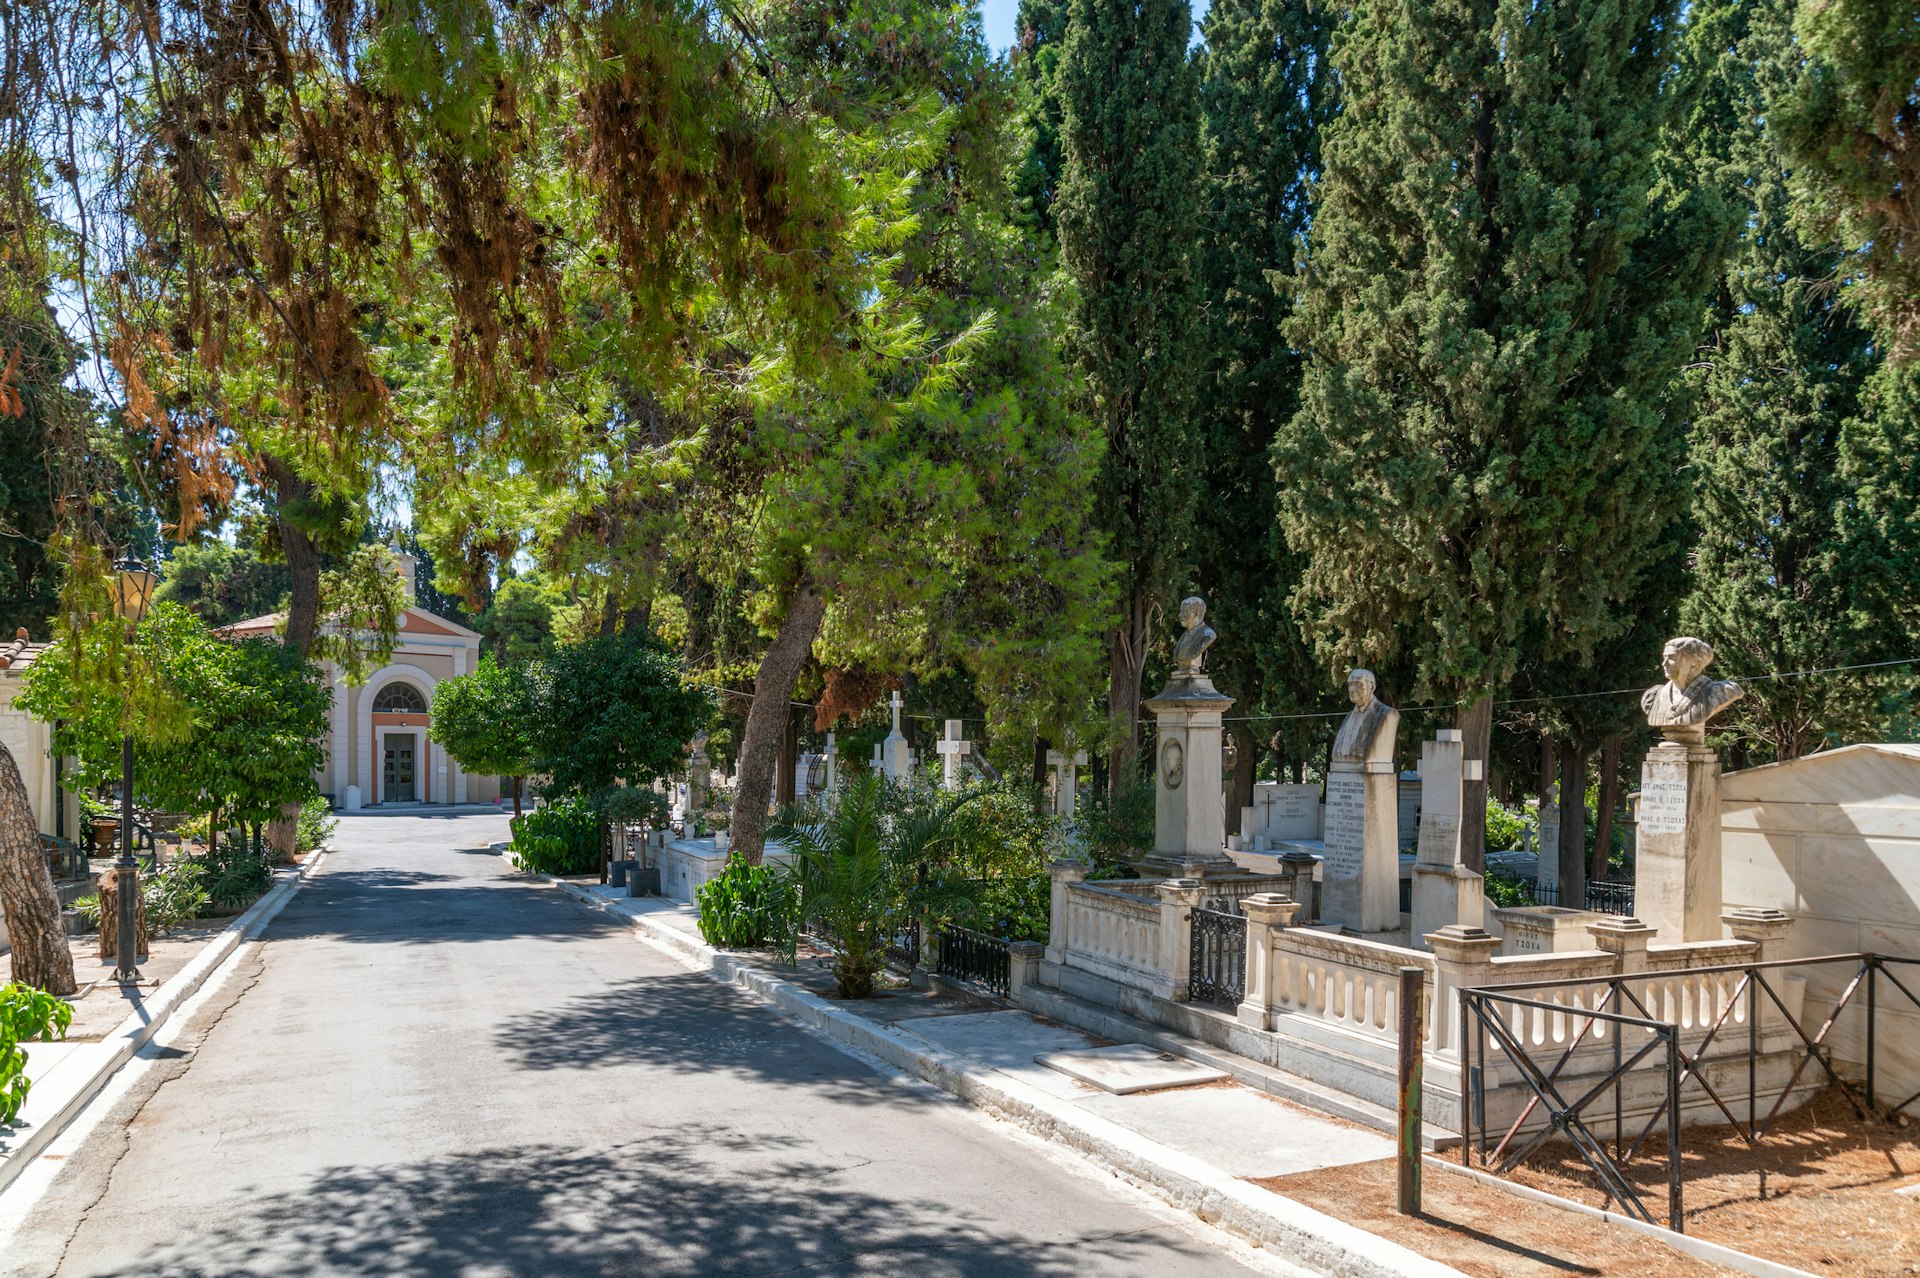 Street with tombs in the First Cemetery of Athens, Greece